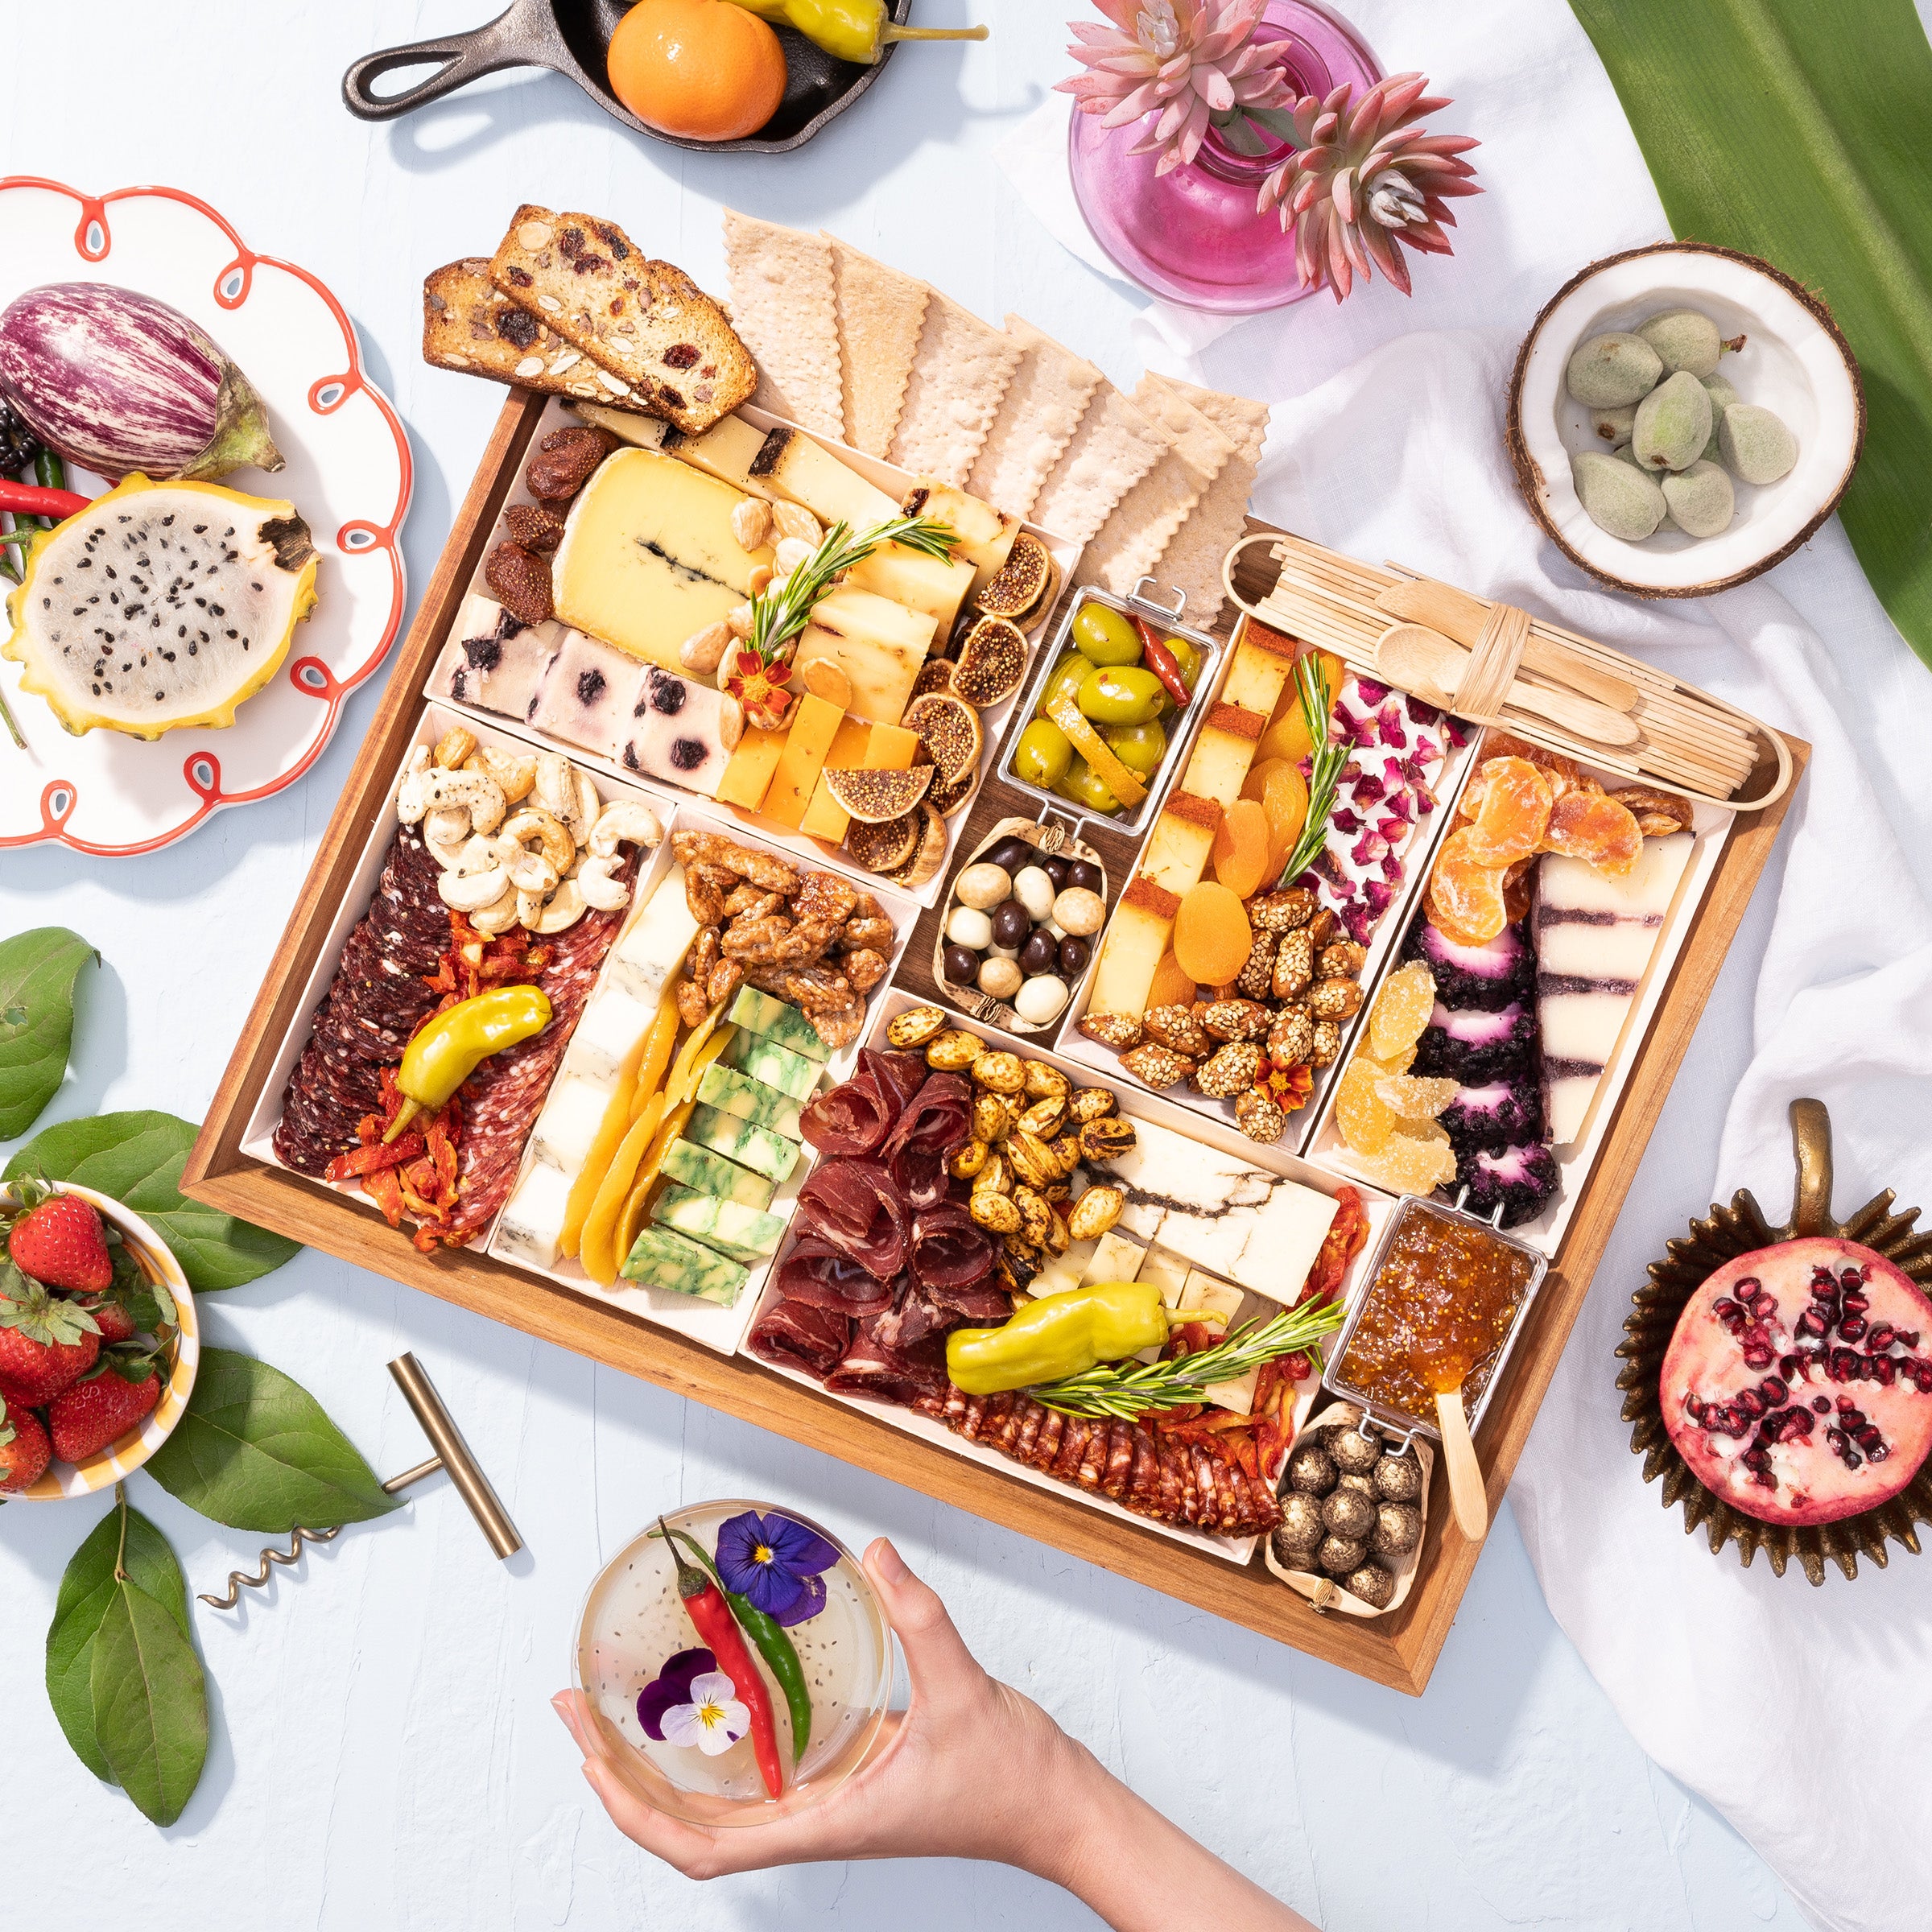 Party Grazing Snack Tray - With Peanut Butter on Top